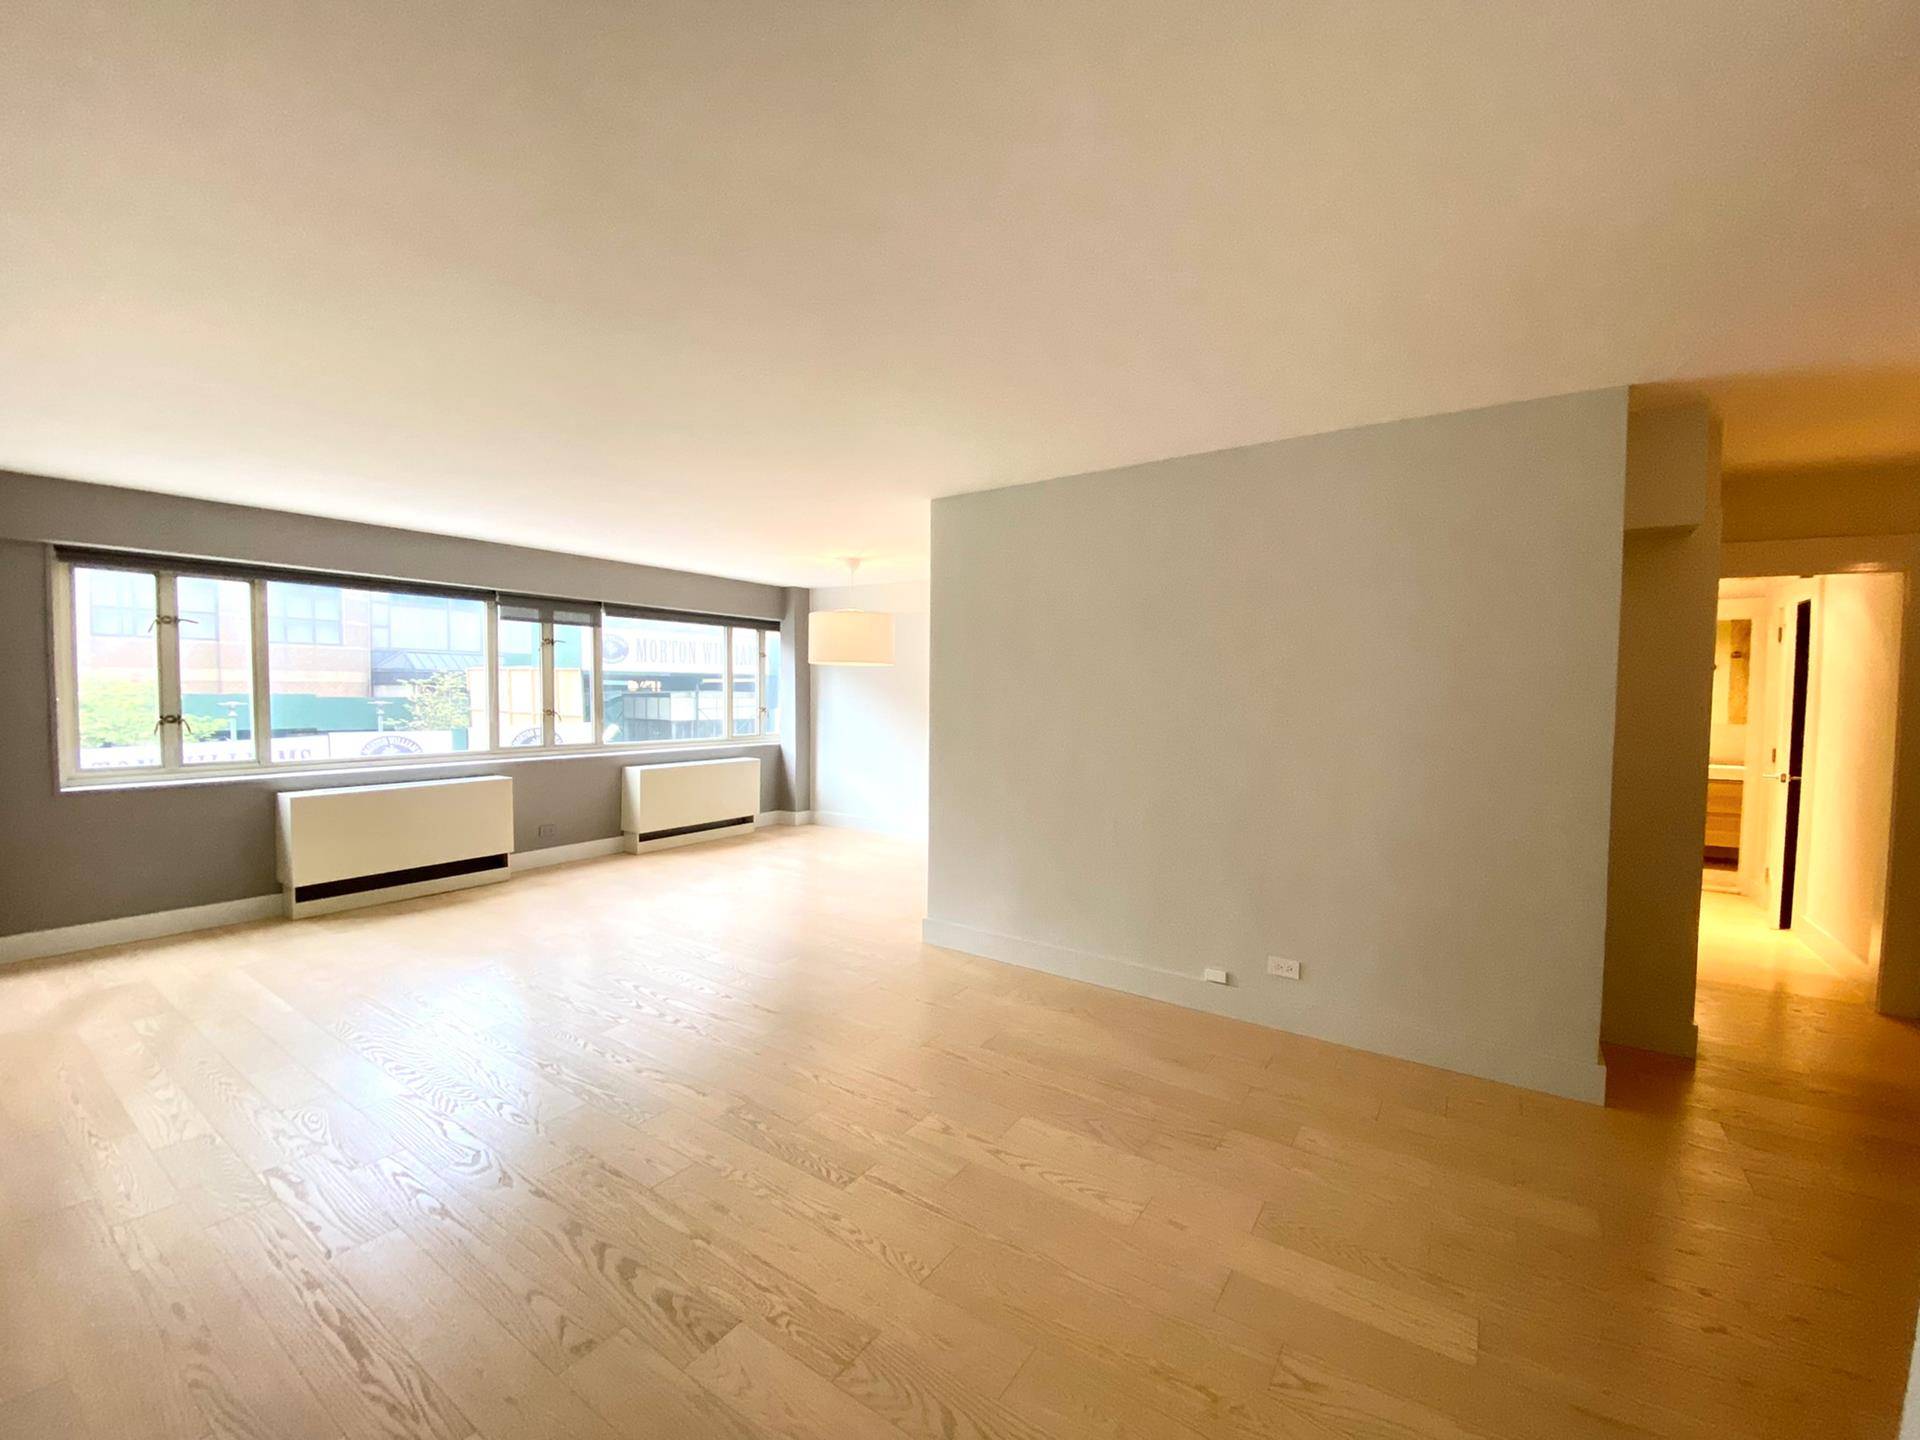 Spacious and renovated 1 bedroom with dining room located in prime Upper East Side condominium, the Beekman Townhouse, designed by Emery Roth amp ; Sons.